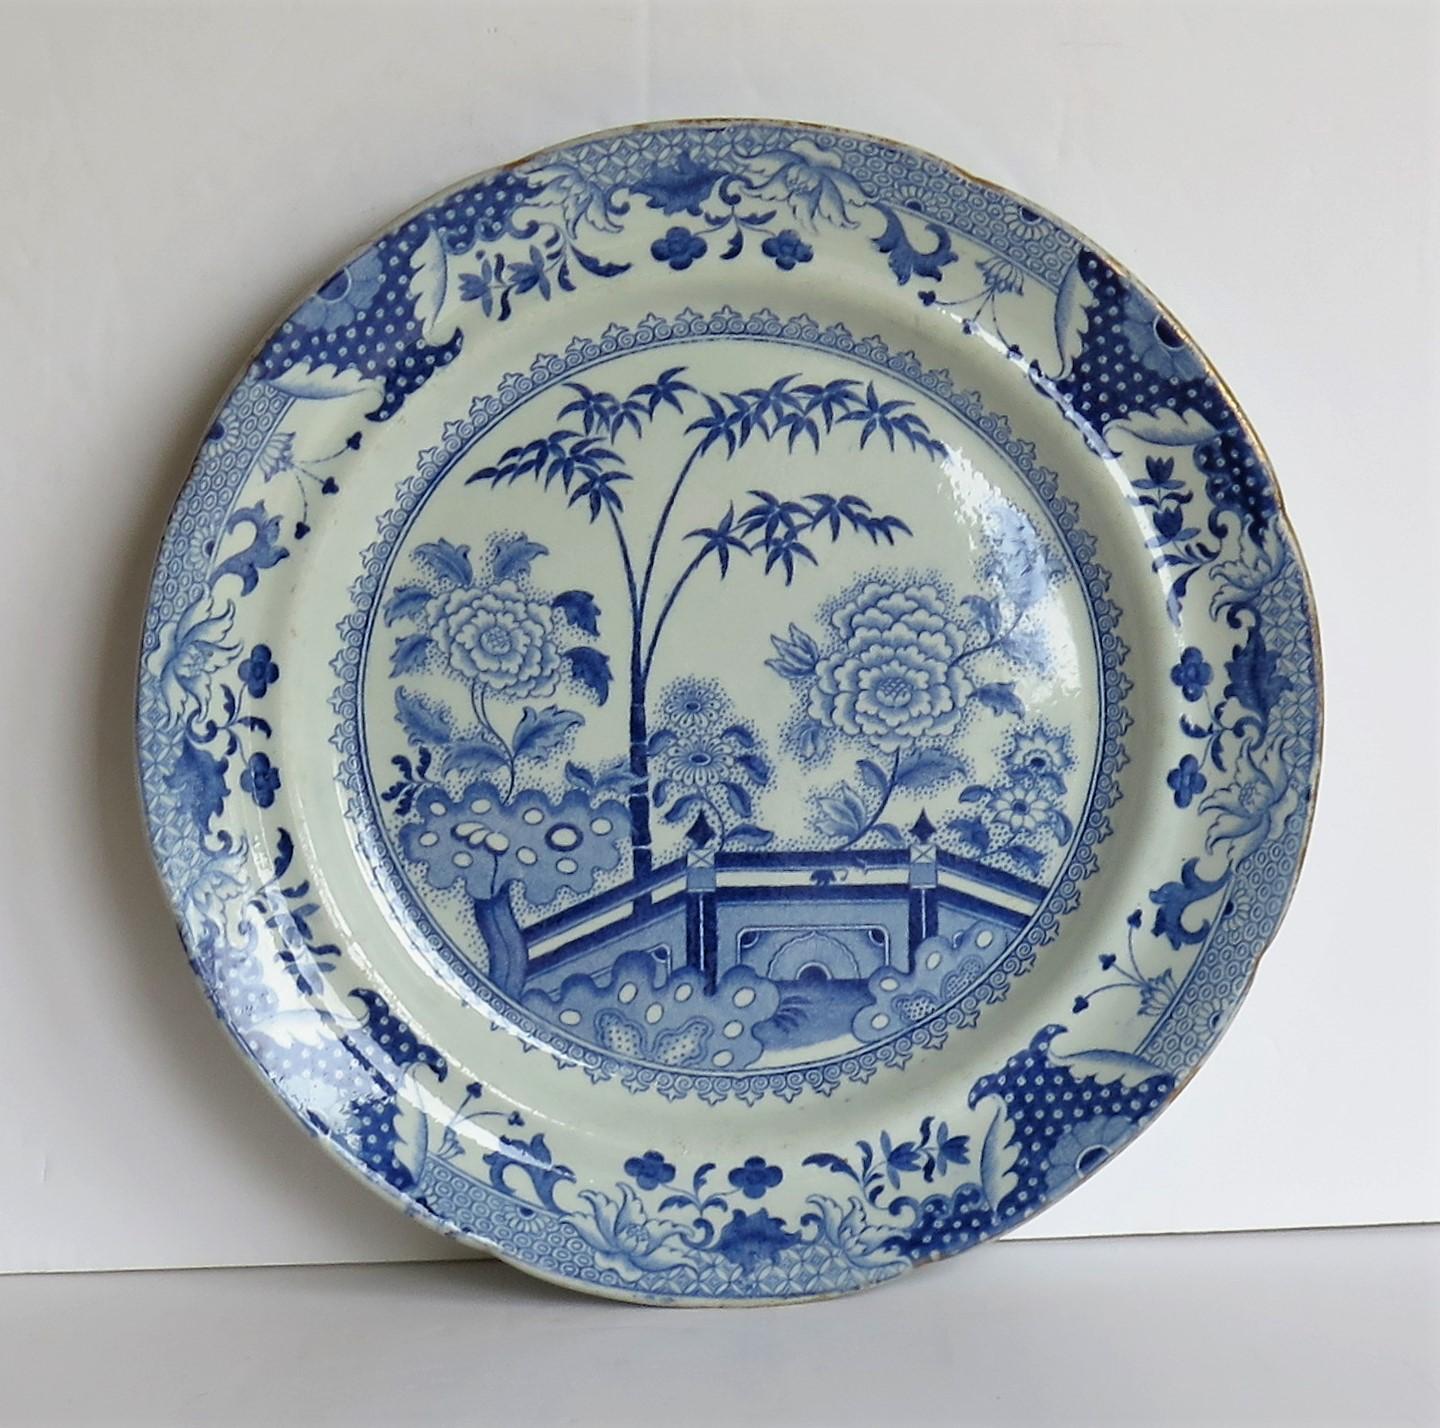 This is a good, late Georgian, Ironstone Dinner Plate decorated in the Blue and White Pattern No. 15, manufacured by the English Davenport factory, which was situated in Longport, Staffordshire, England between 1794 and 1887.

The oriental garden